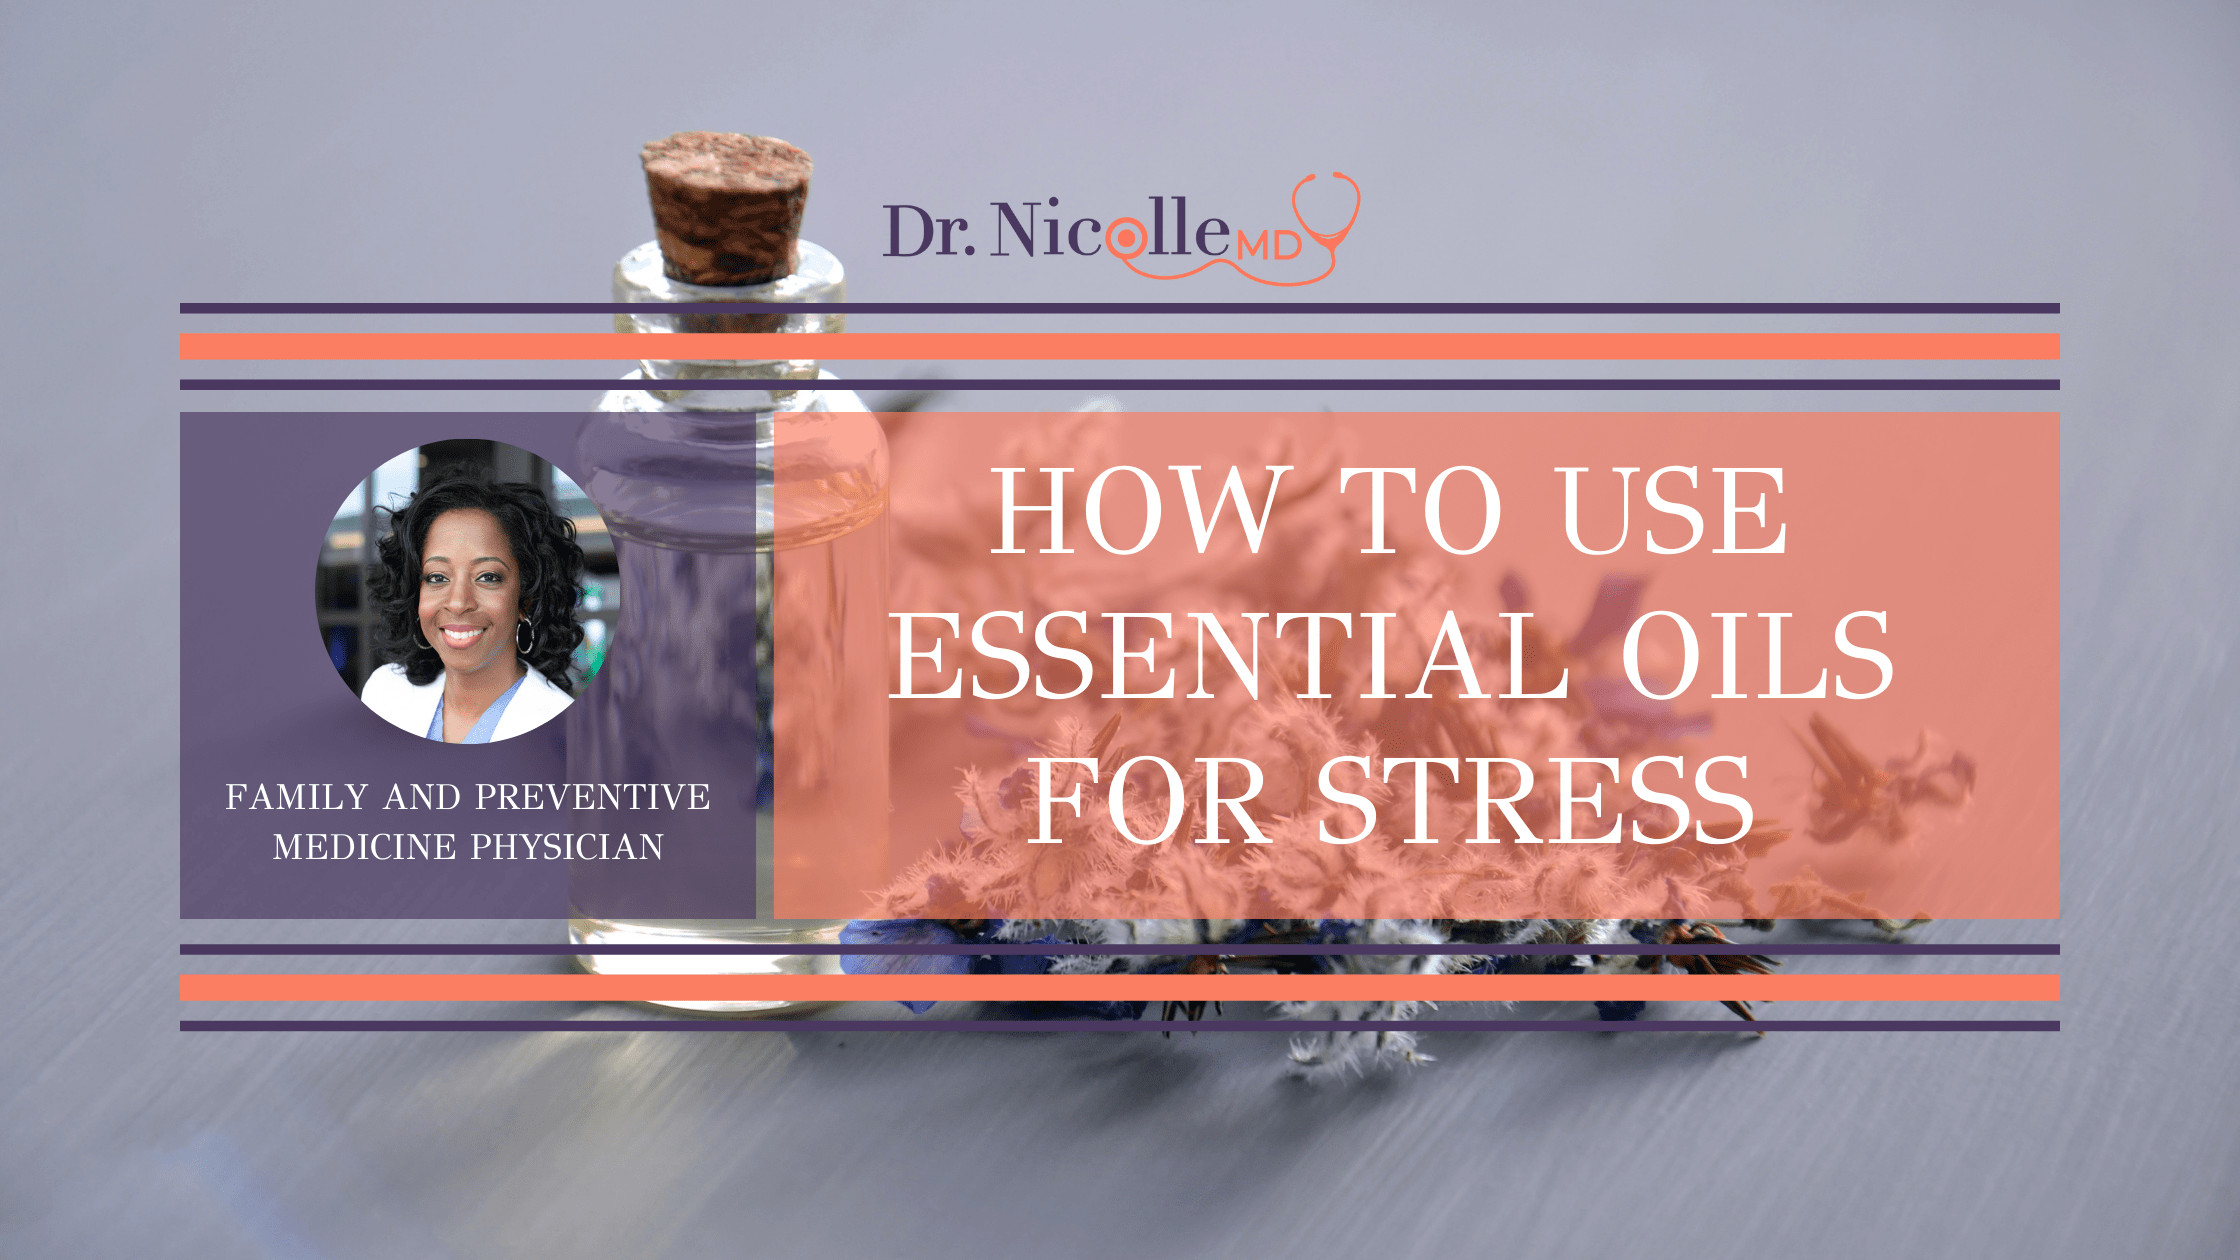 11How to Use Essential Oils for Stress